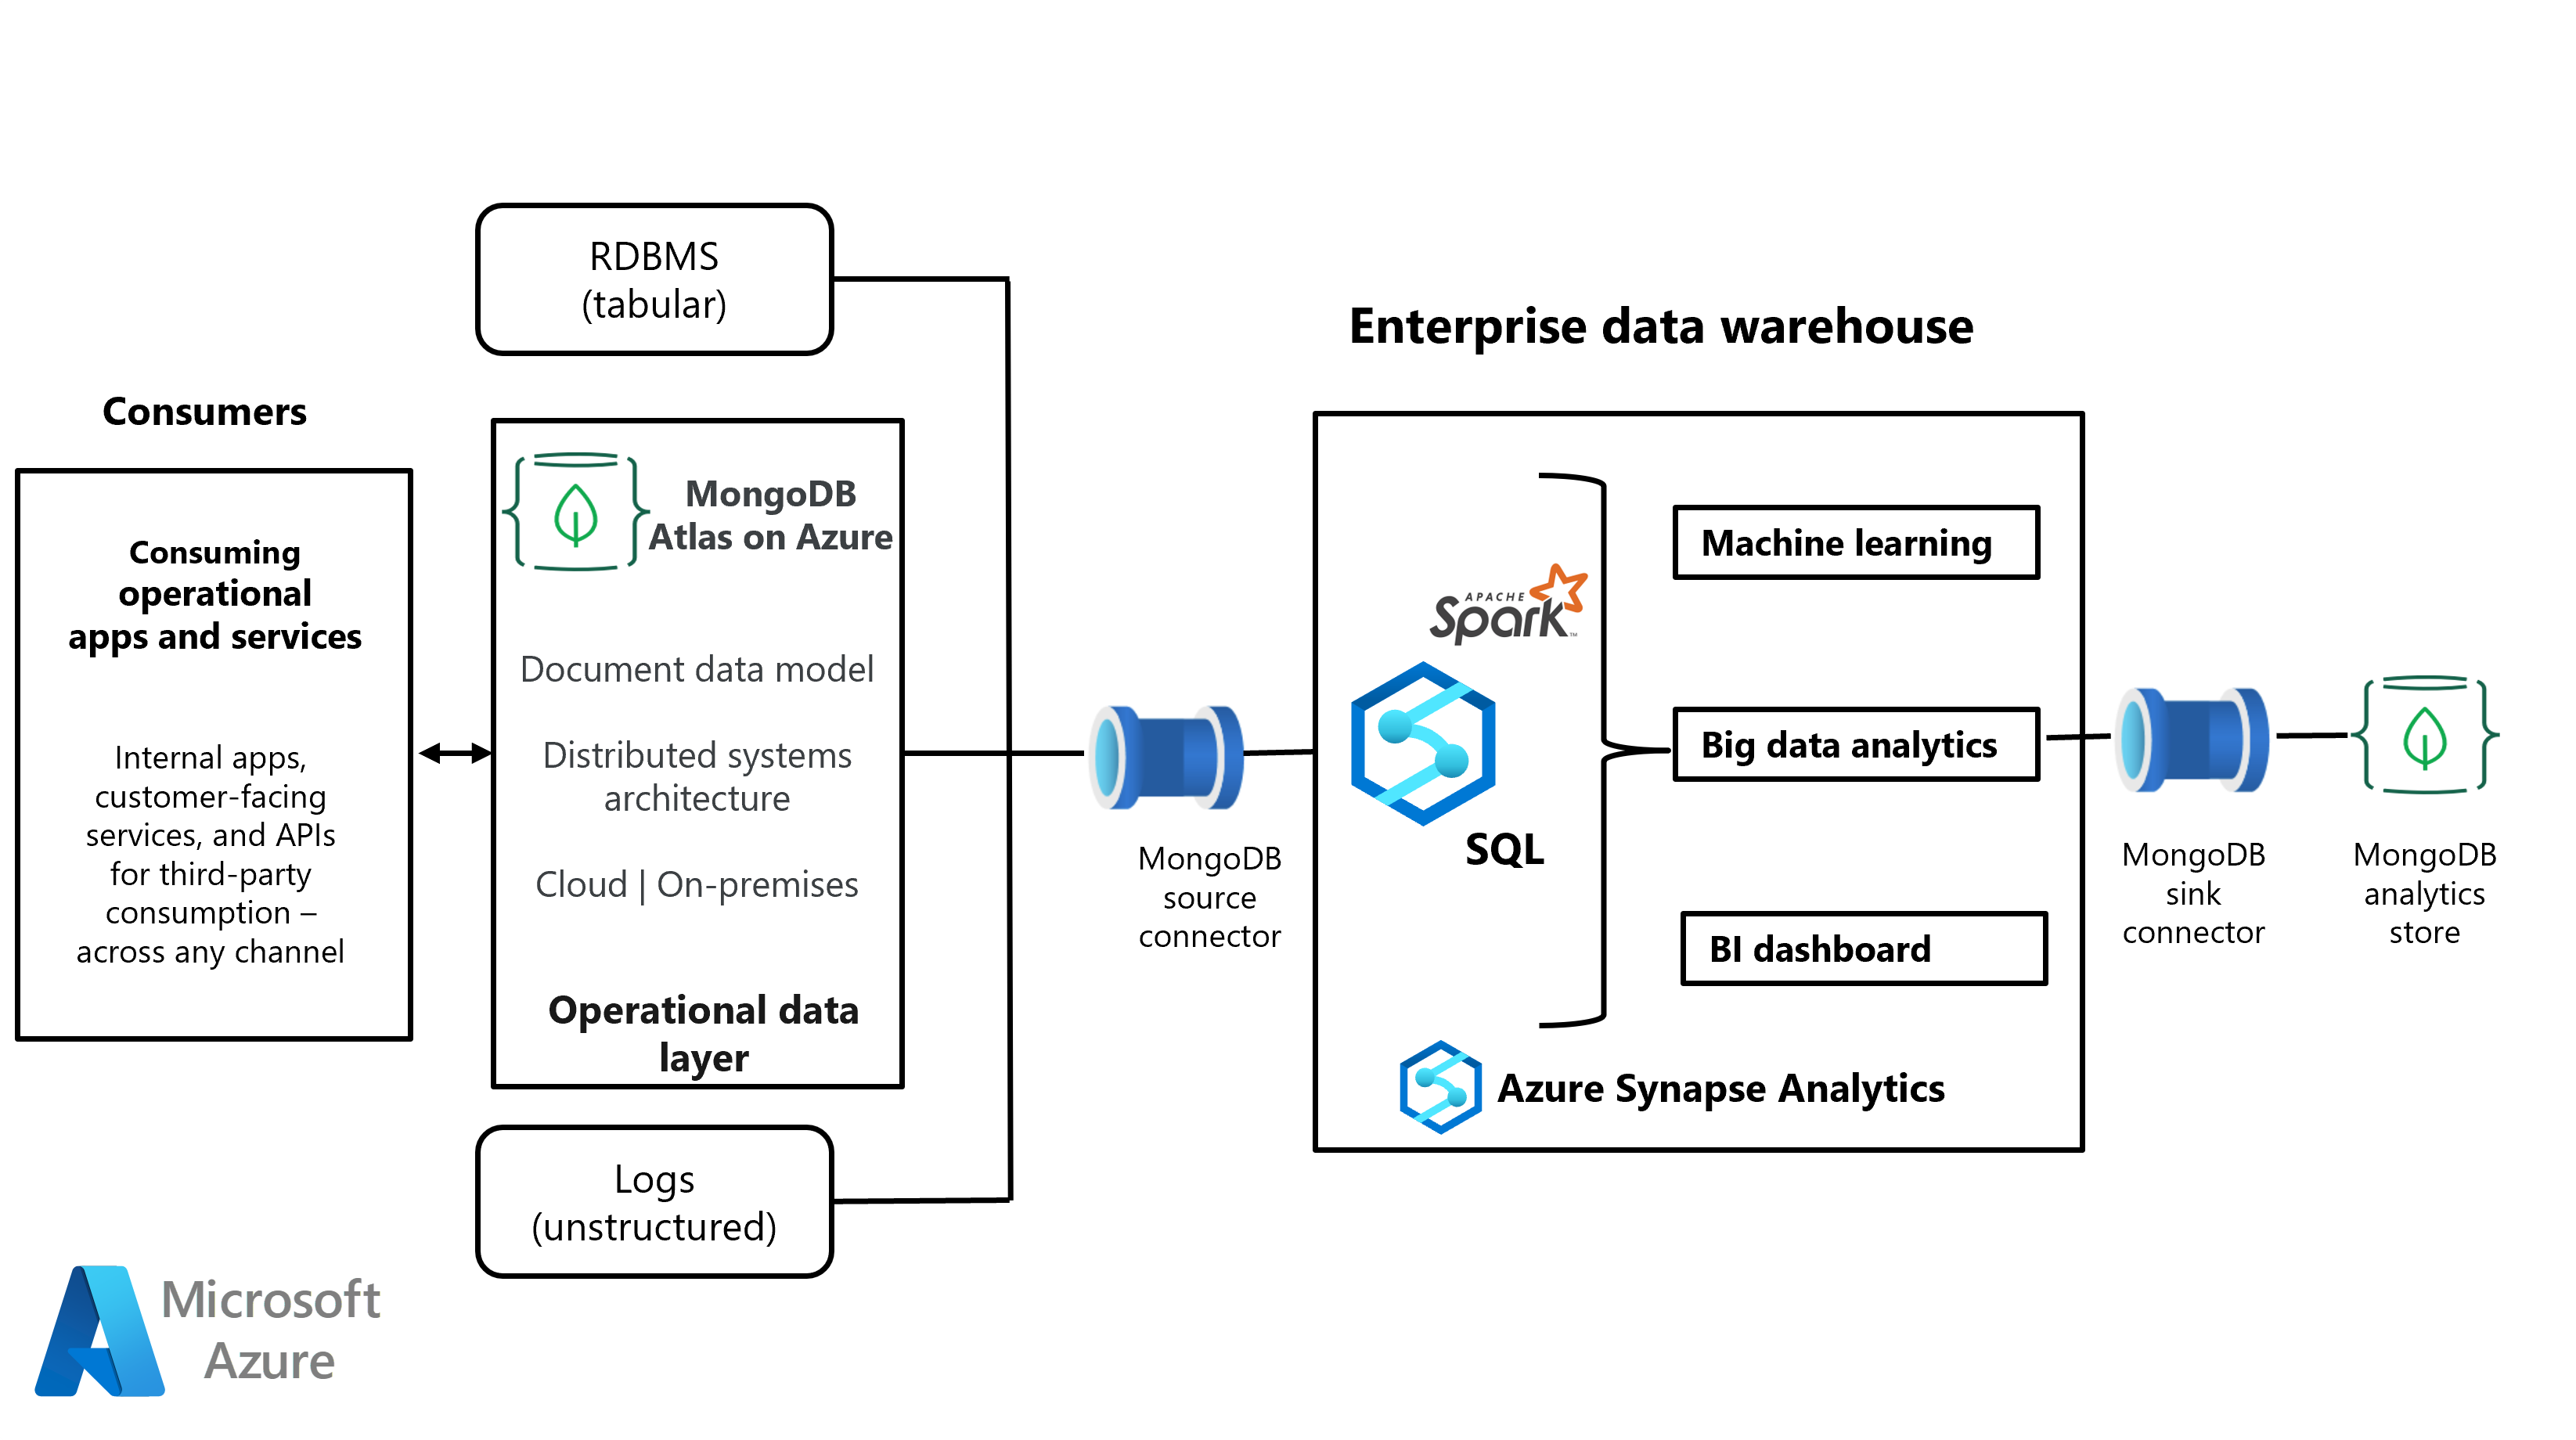 Architecture diagram that shows the source and sink connectors that connect data from consumers to Azure Synapse Analytics and MongoDB data storage.